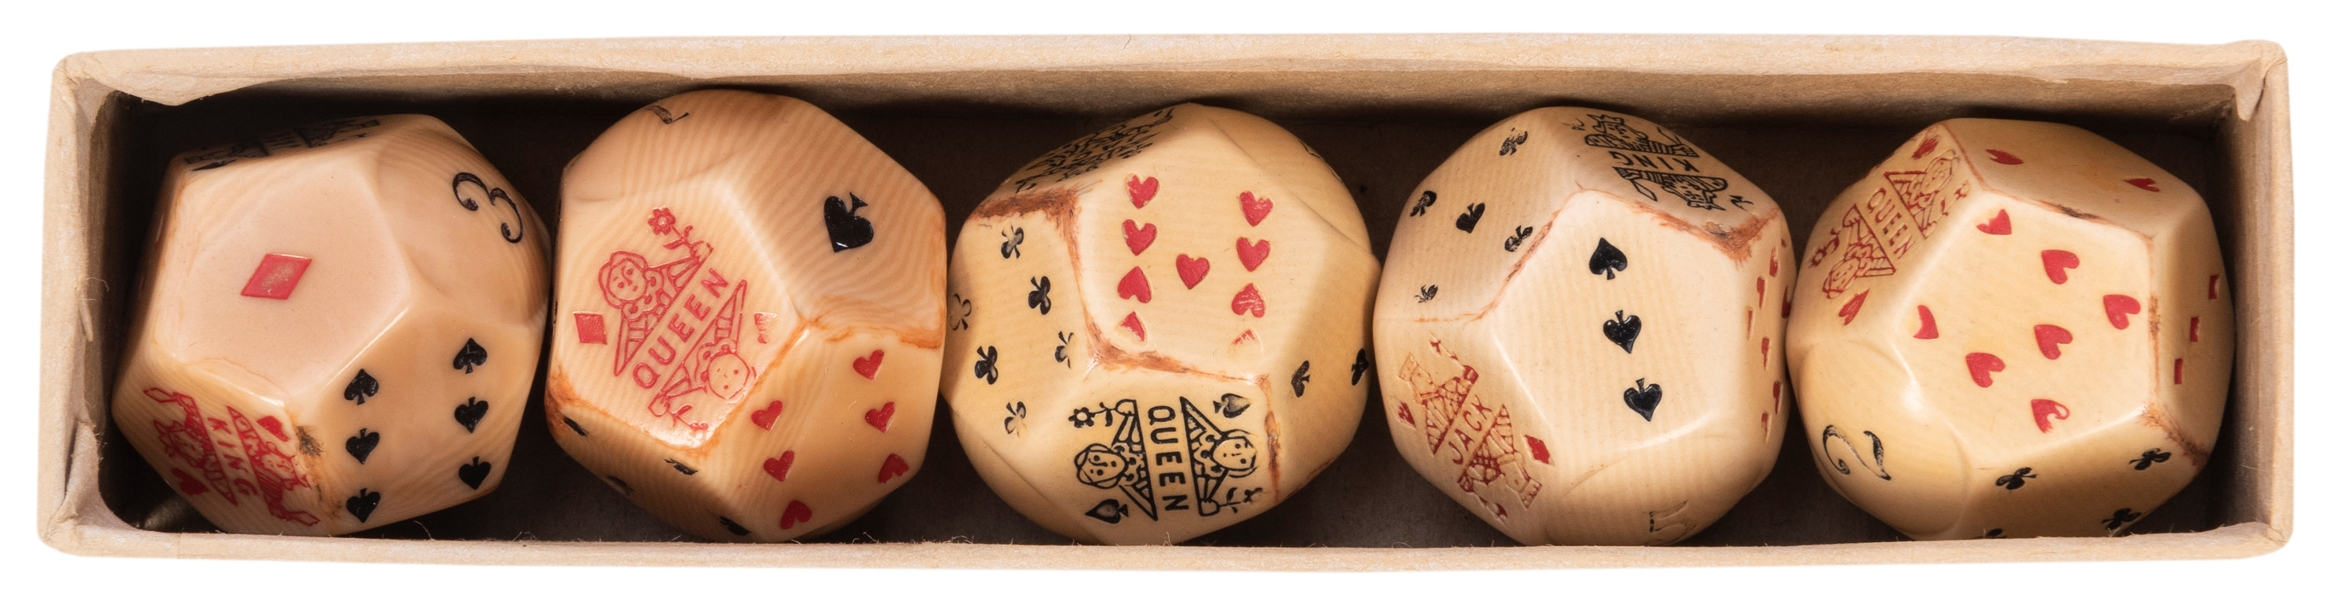  Montana Dice Set. Complete set of five celluloid ten-sided ...